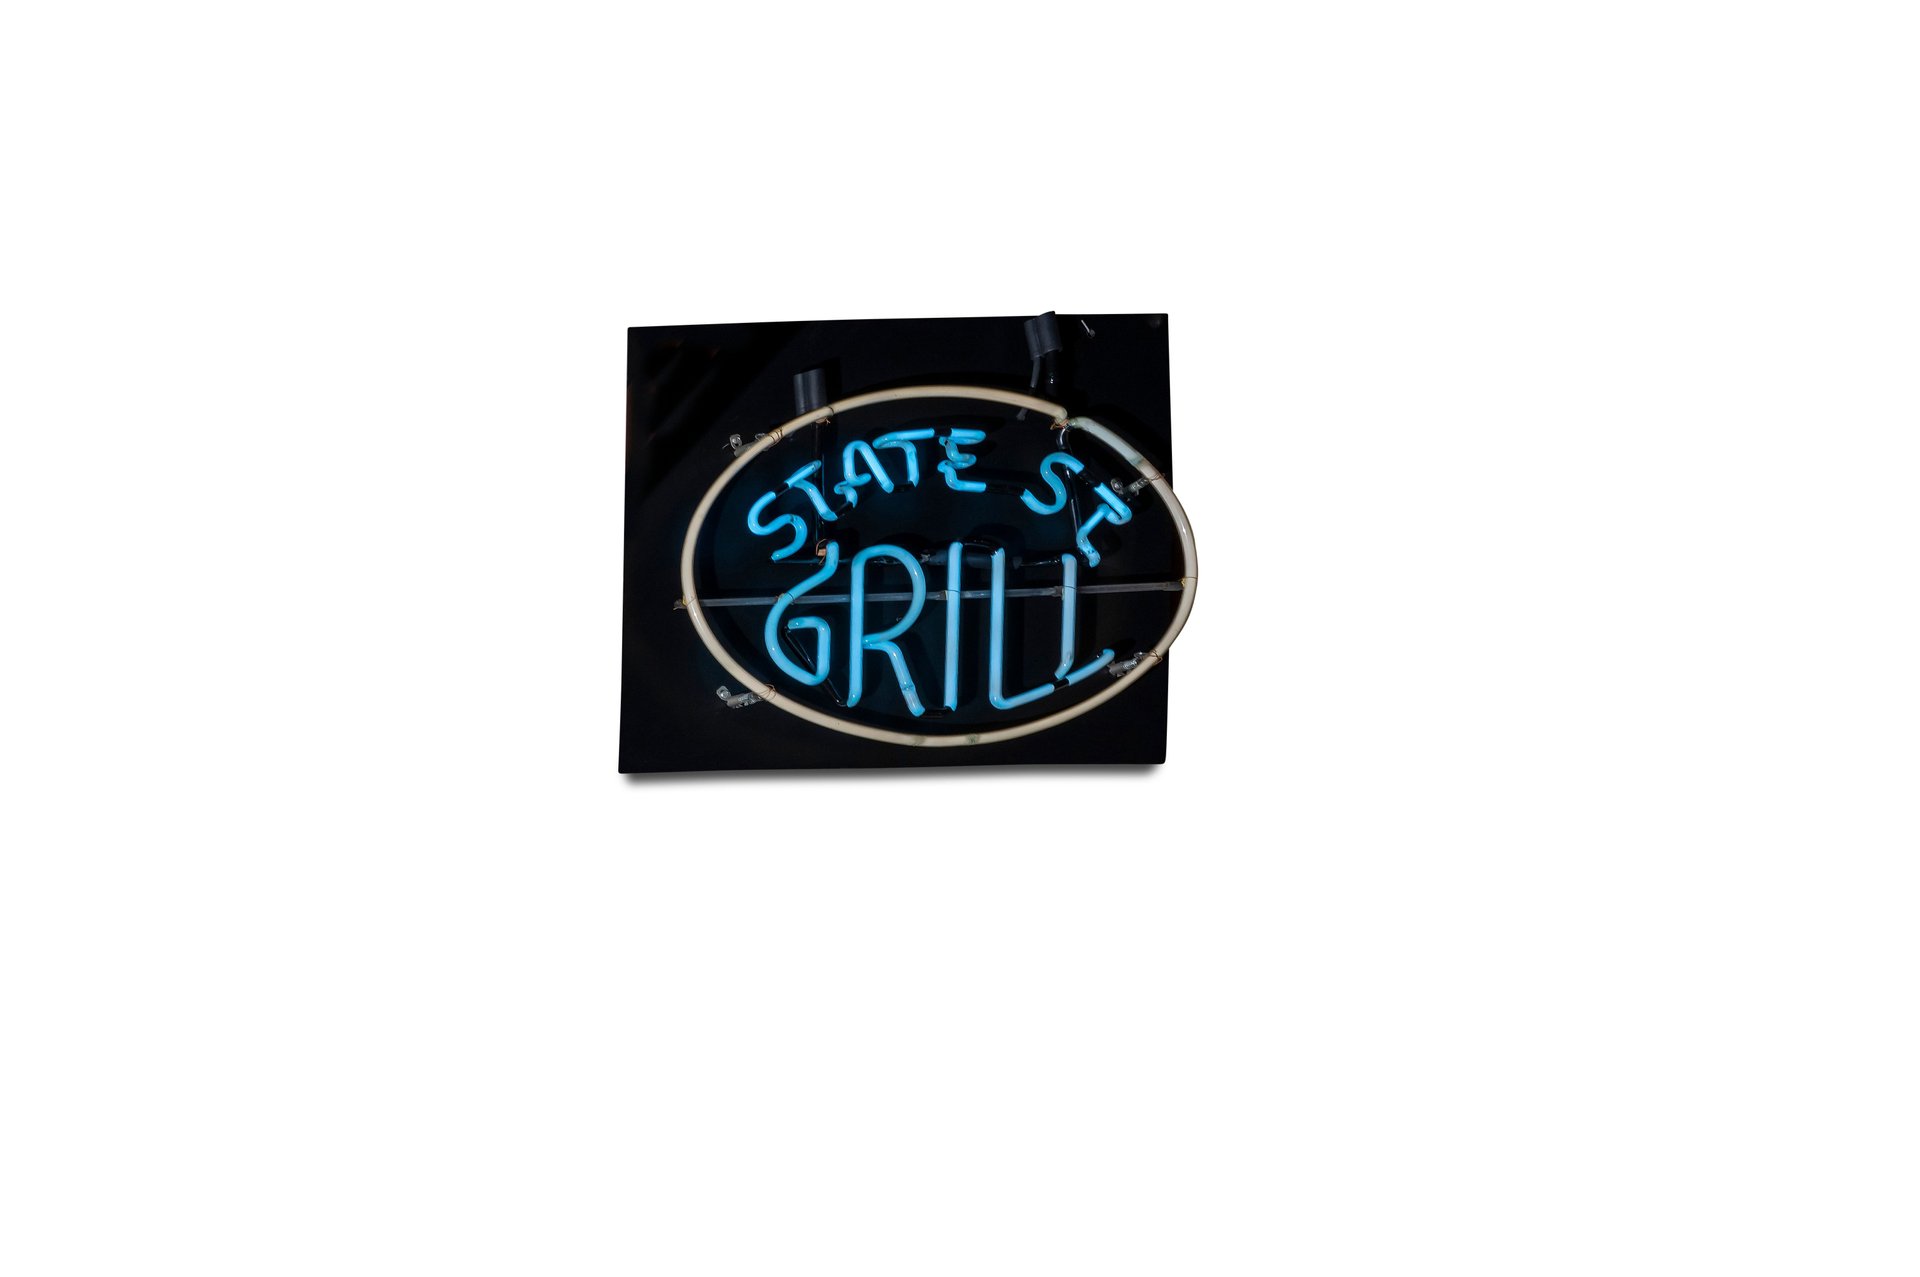 Broad Arrow Auctions | State St. Grill Neon Sign